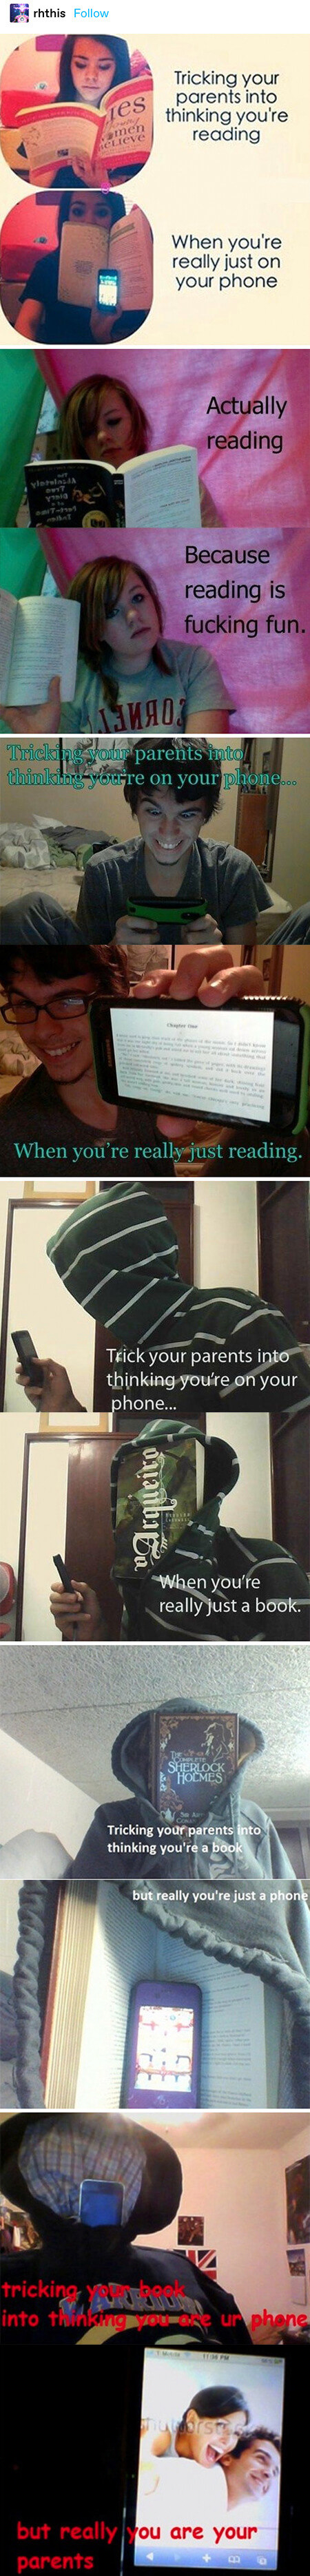 &quot;tricking your parents into thinking you&#x27;re reading but really you&#x27;re on your phone&quot; with pictures then different bizarre follow-ups like &quot;tricking your parents into thinking you&#x27;re on your phone when you&#x27;re really just a book&quot;